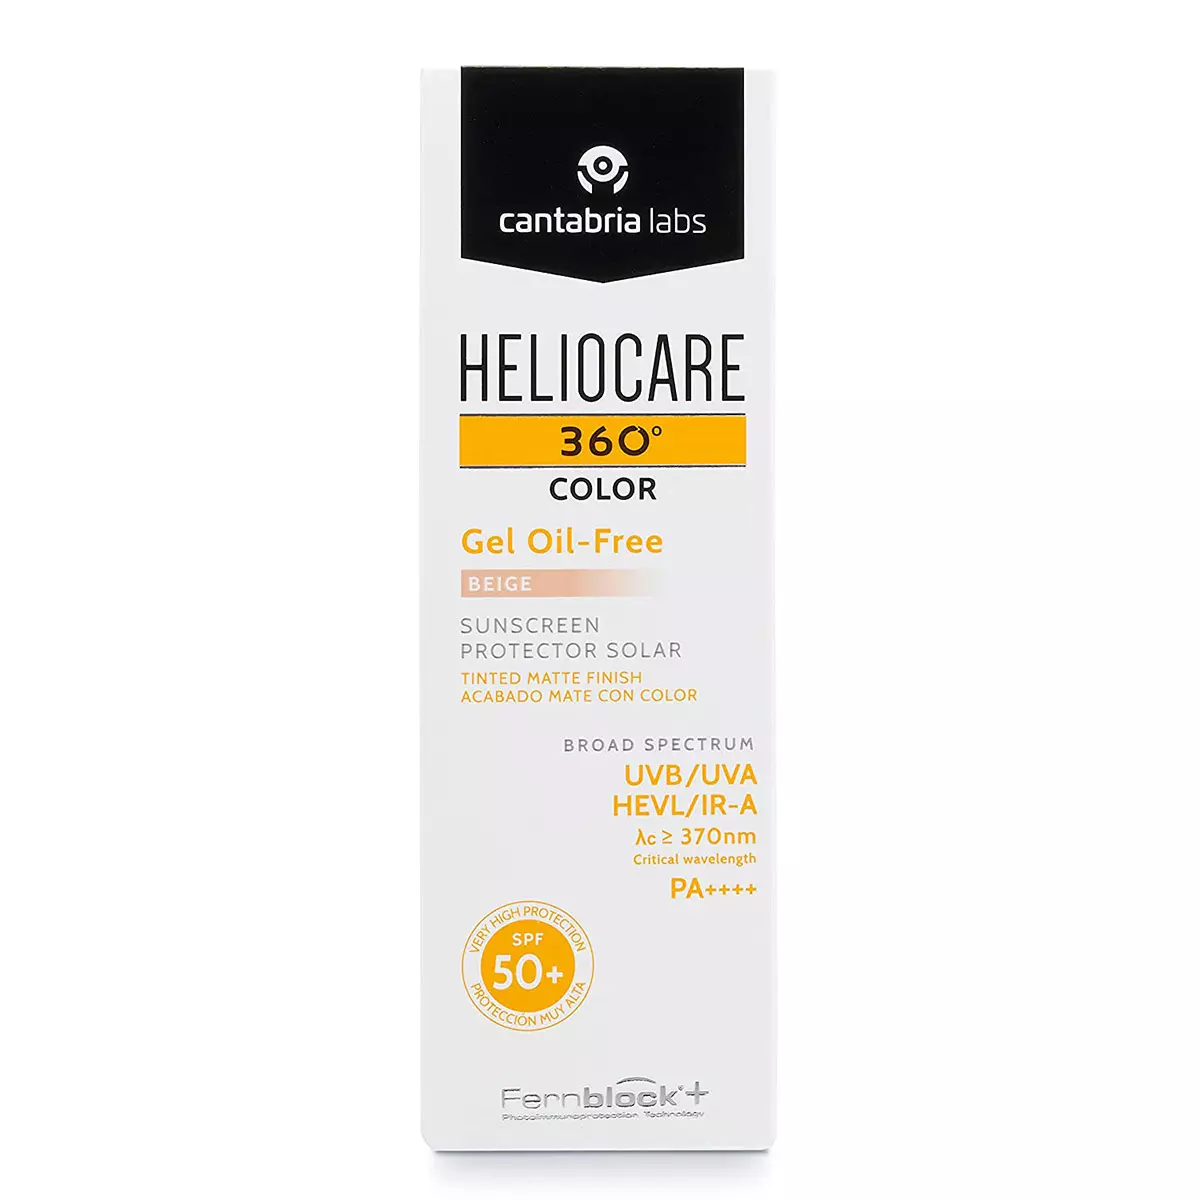 Helicocare oil gel free